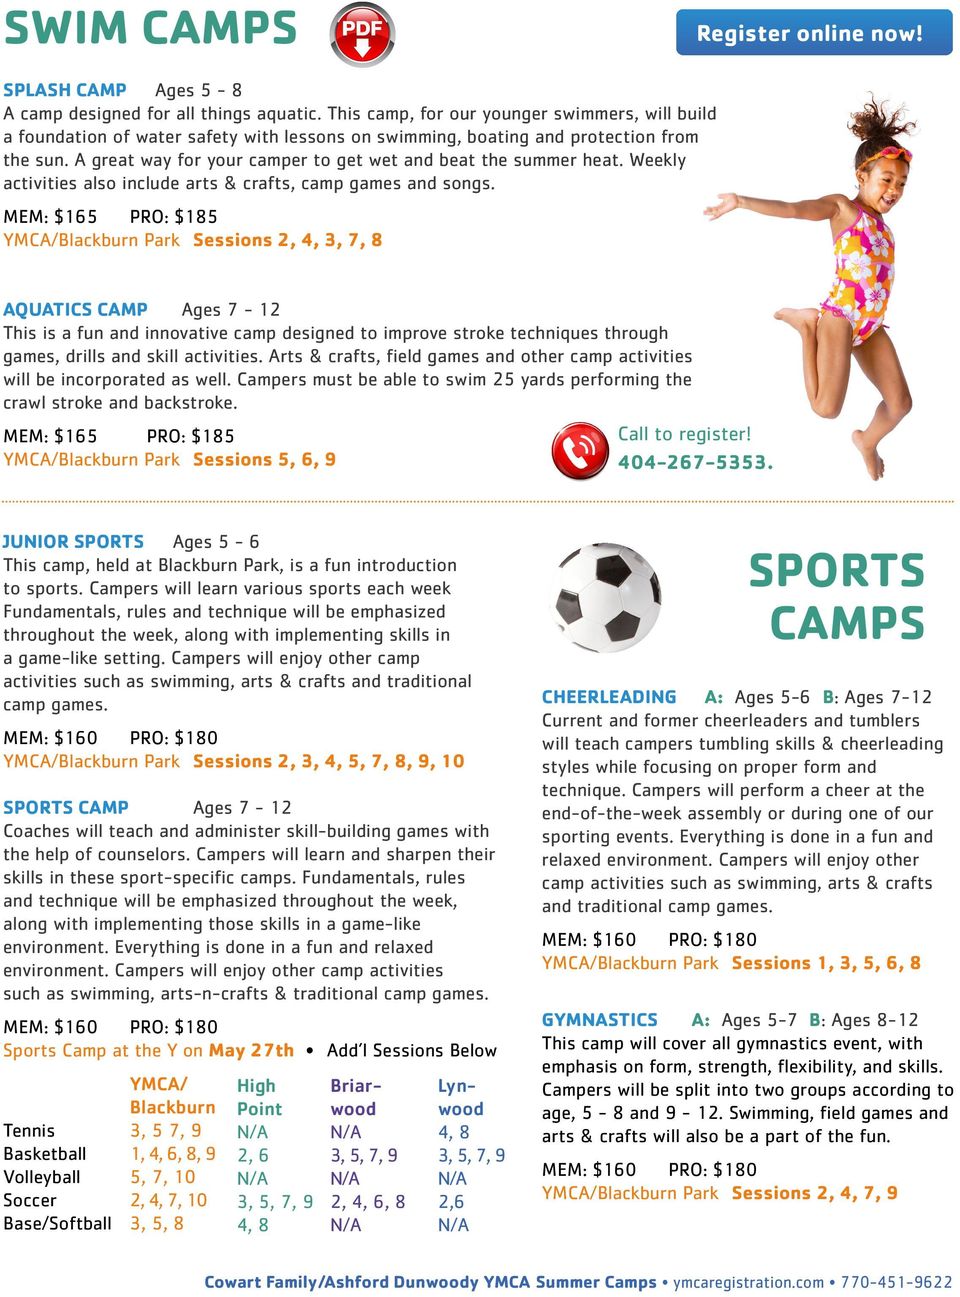 A great way for your camper to get wet and beat the summer heat. Weekly activities also include arts & crafts, camp games and songs.